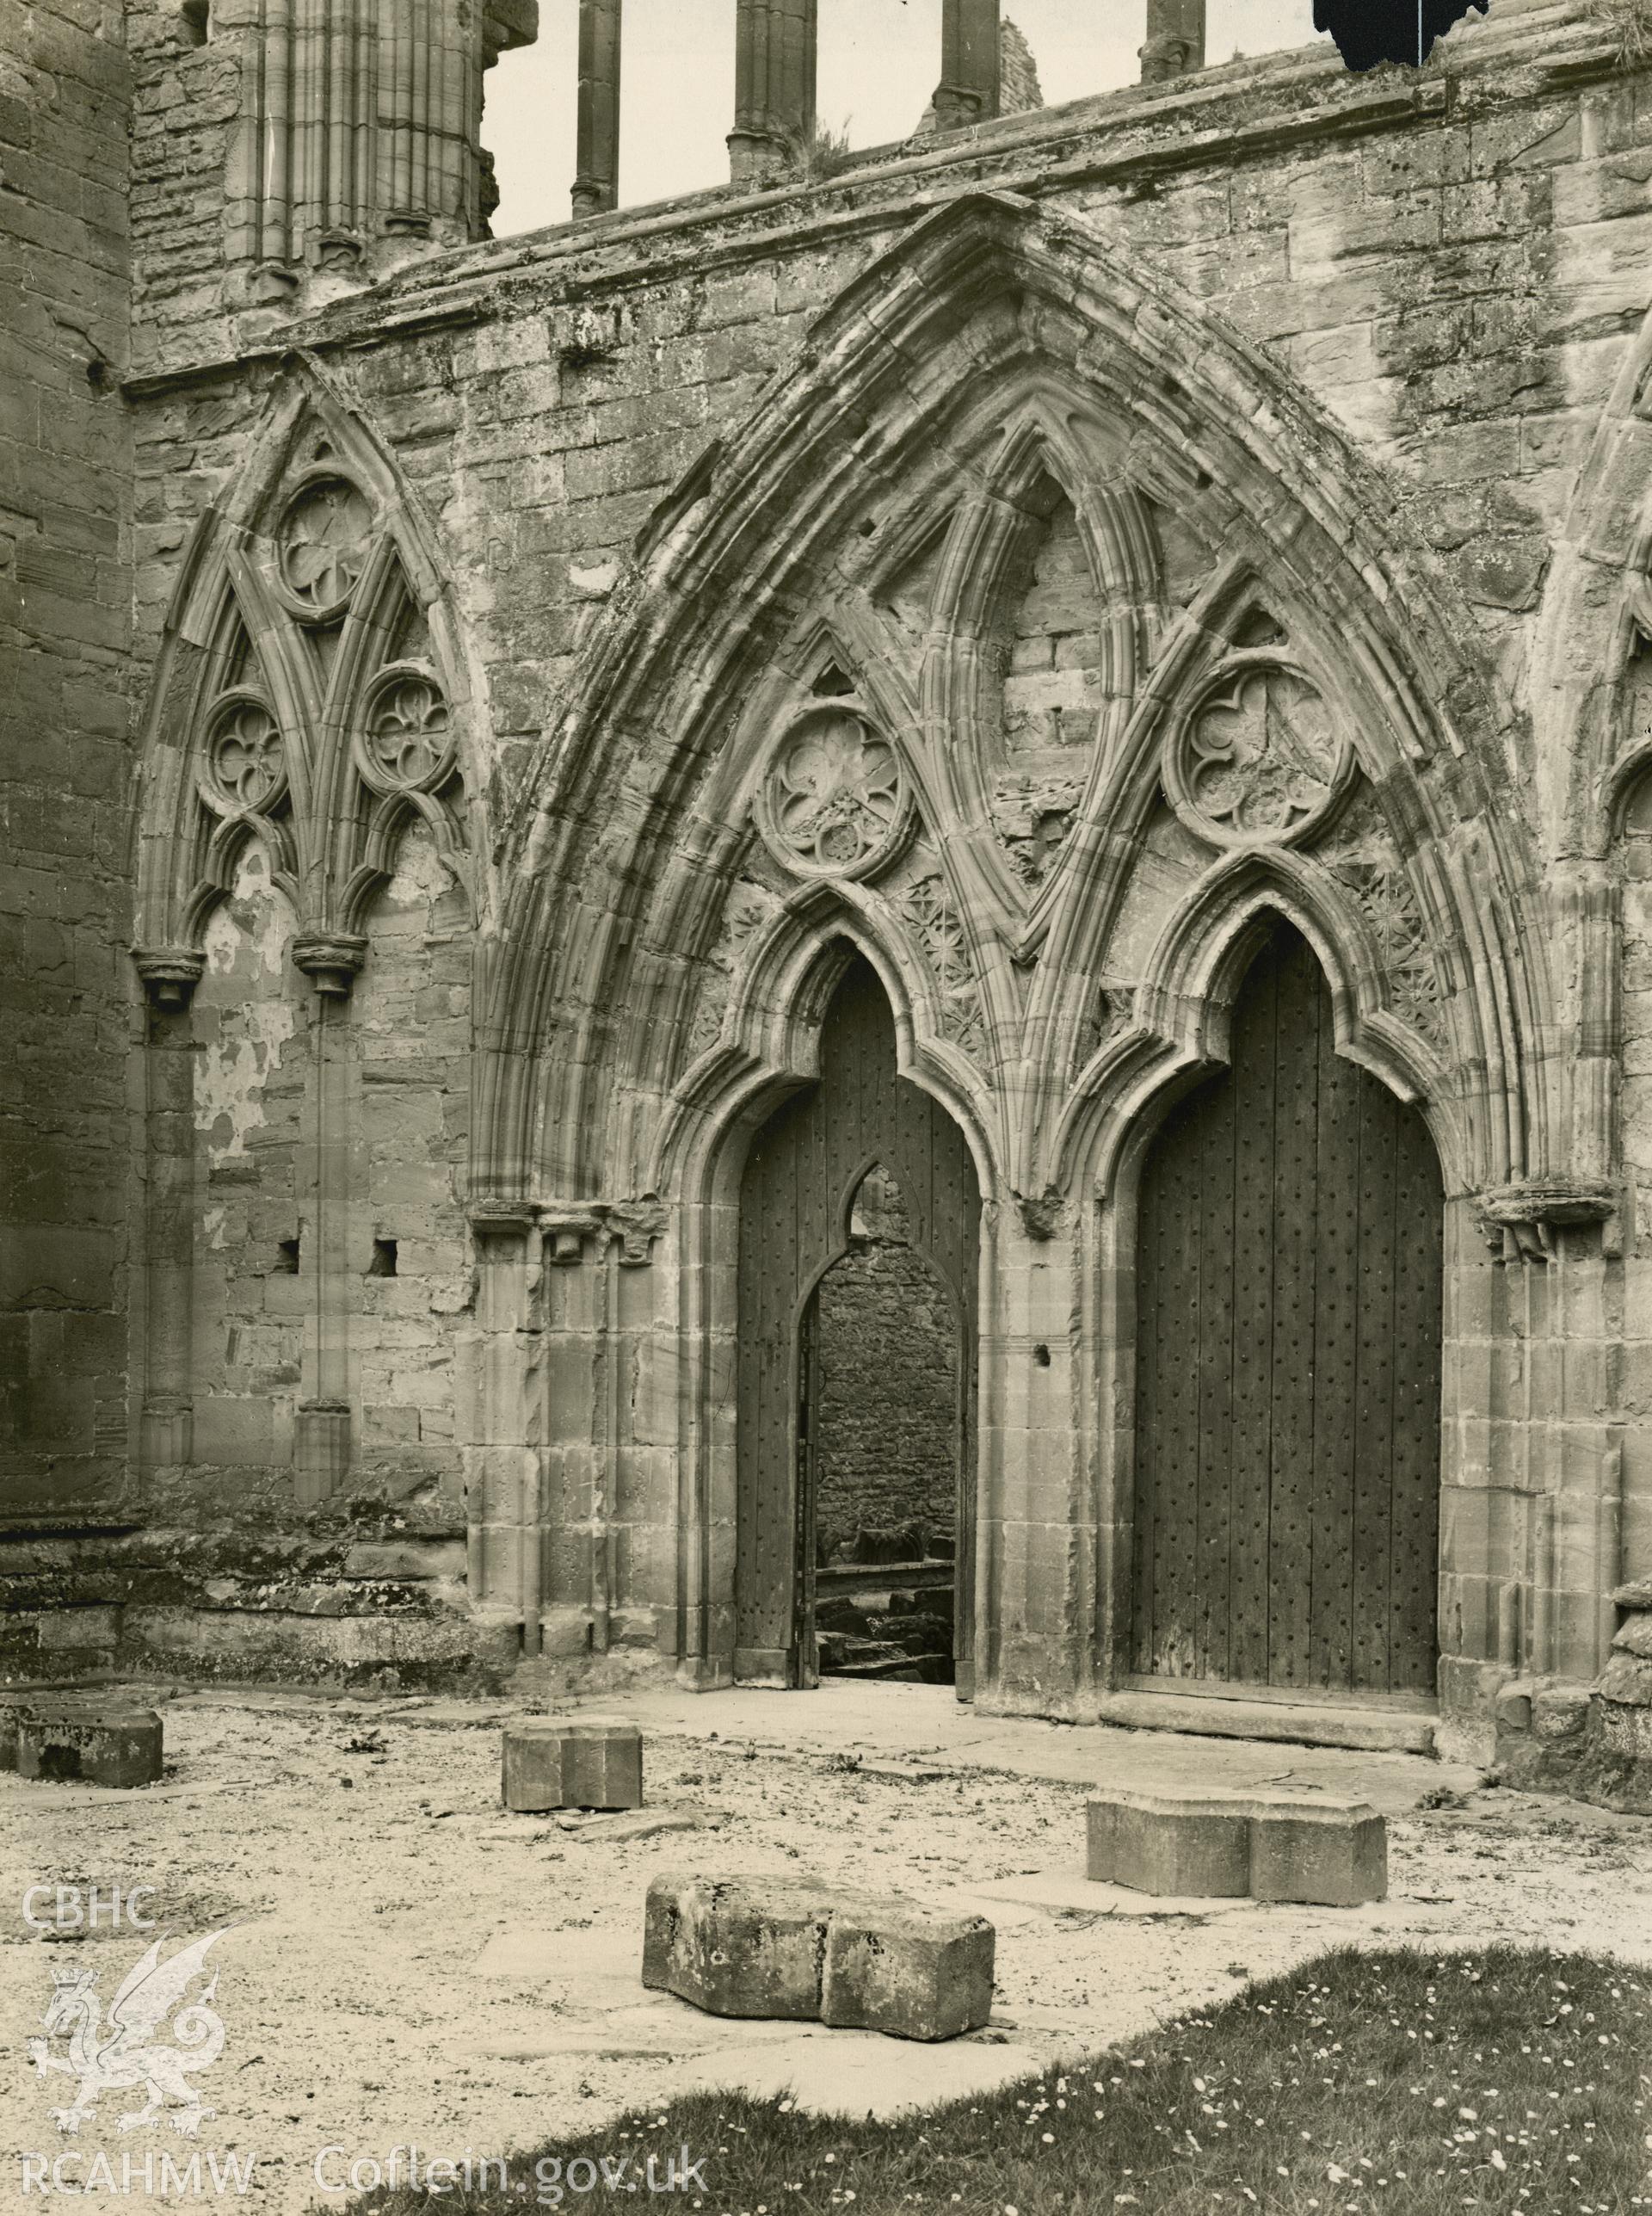 Digital copy of an early National Buildings Record photograph showing the great west doorway at Tintern Abbey.